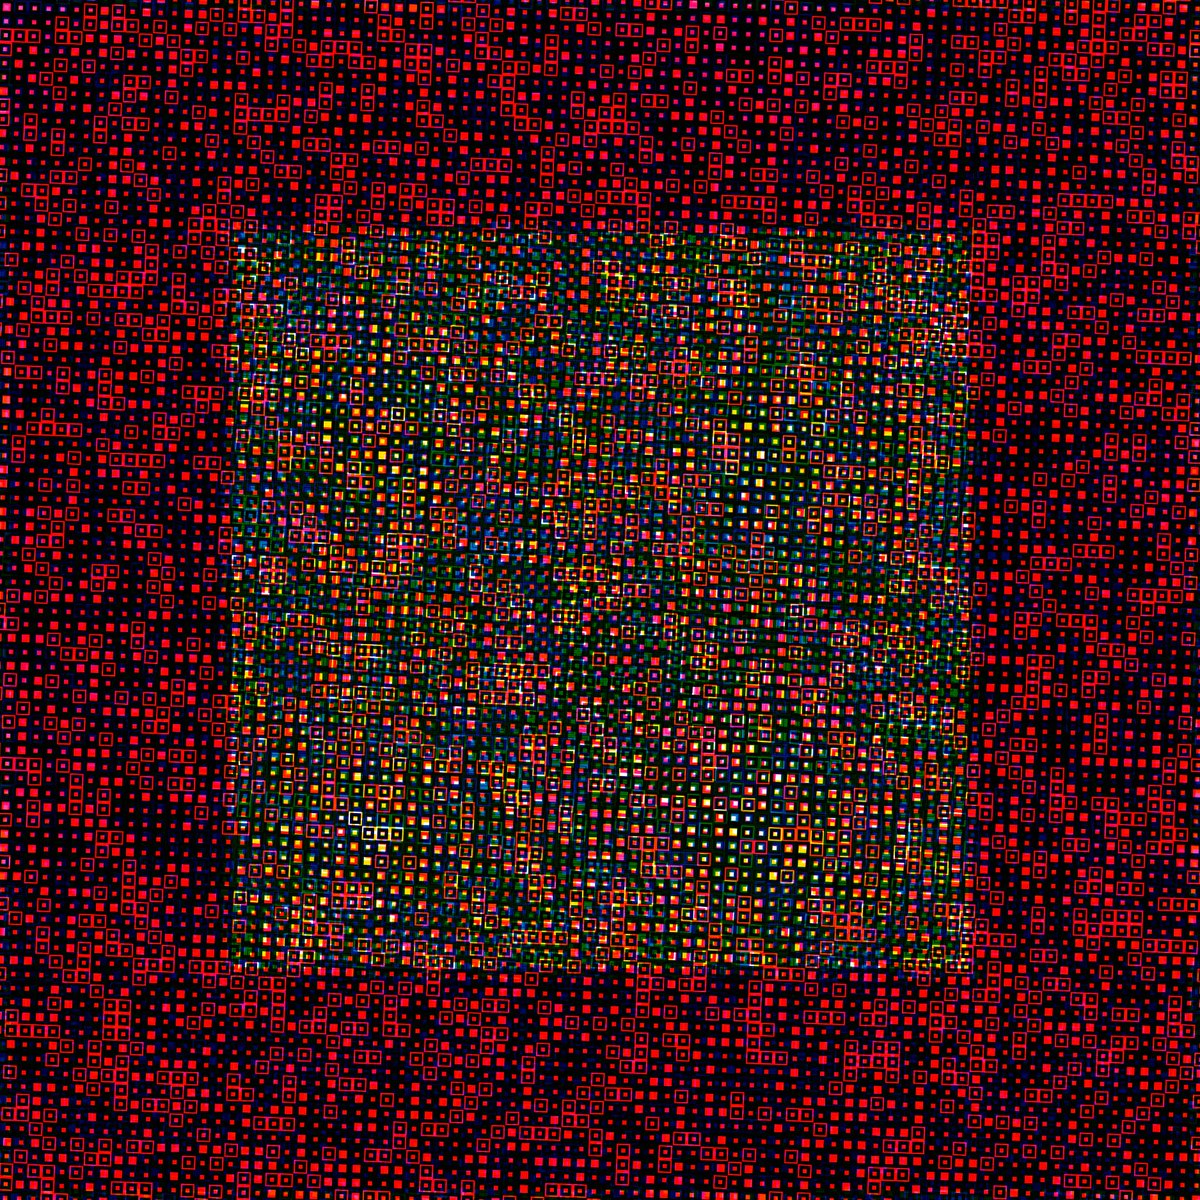 This is Dissonance #9, owned by @abstractment. I like the chaotic nature of this edition. The grids are made of many small objects, and the central pattern looks like it could have been generated with Perlin noise, but it's made only of angle rotations and size variations.